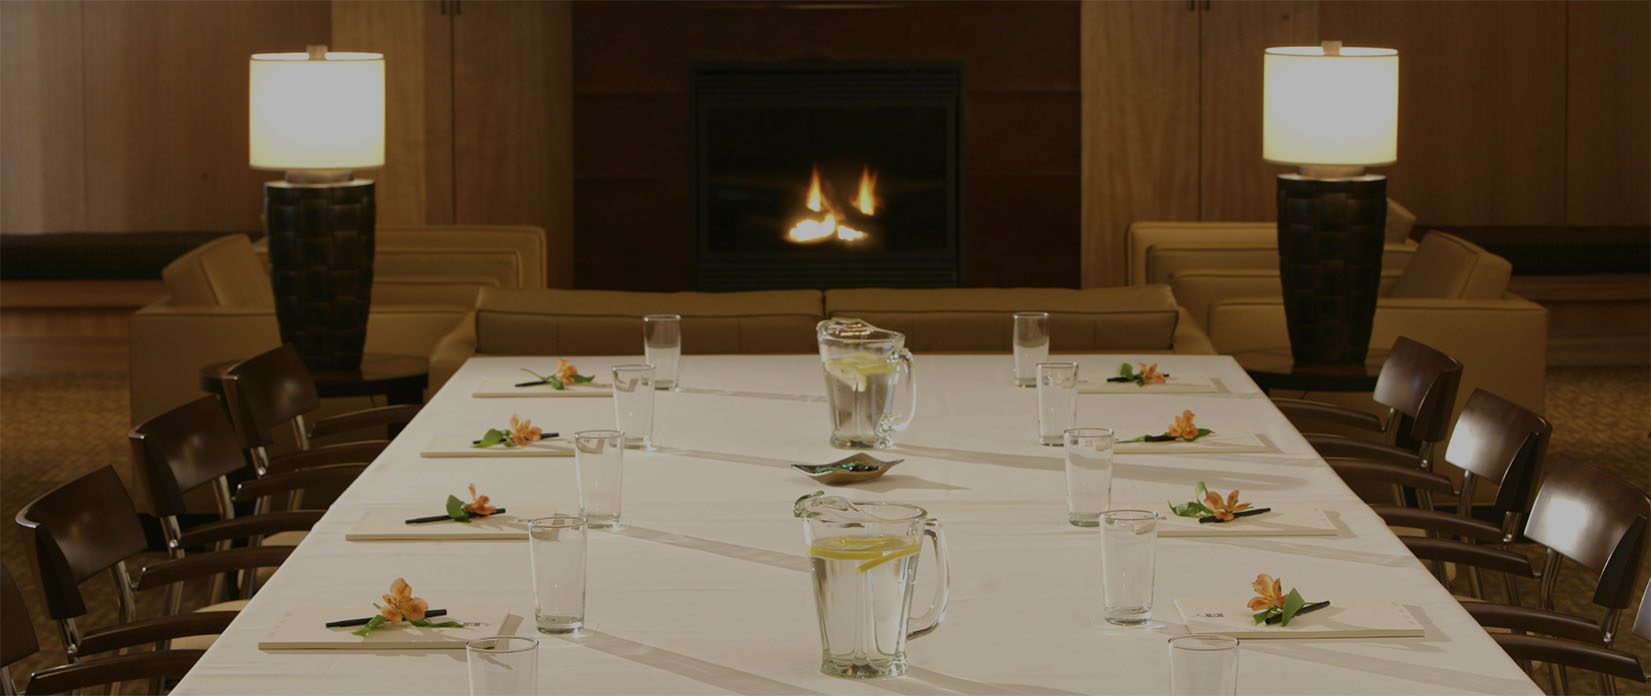 Meeting Table by fireplace